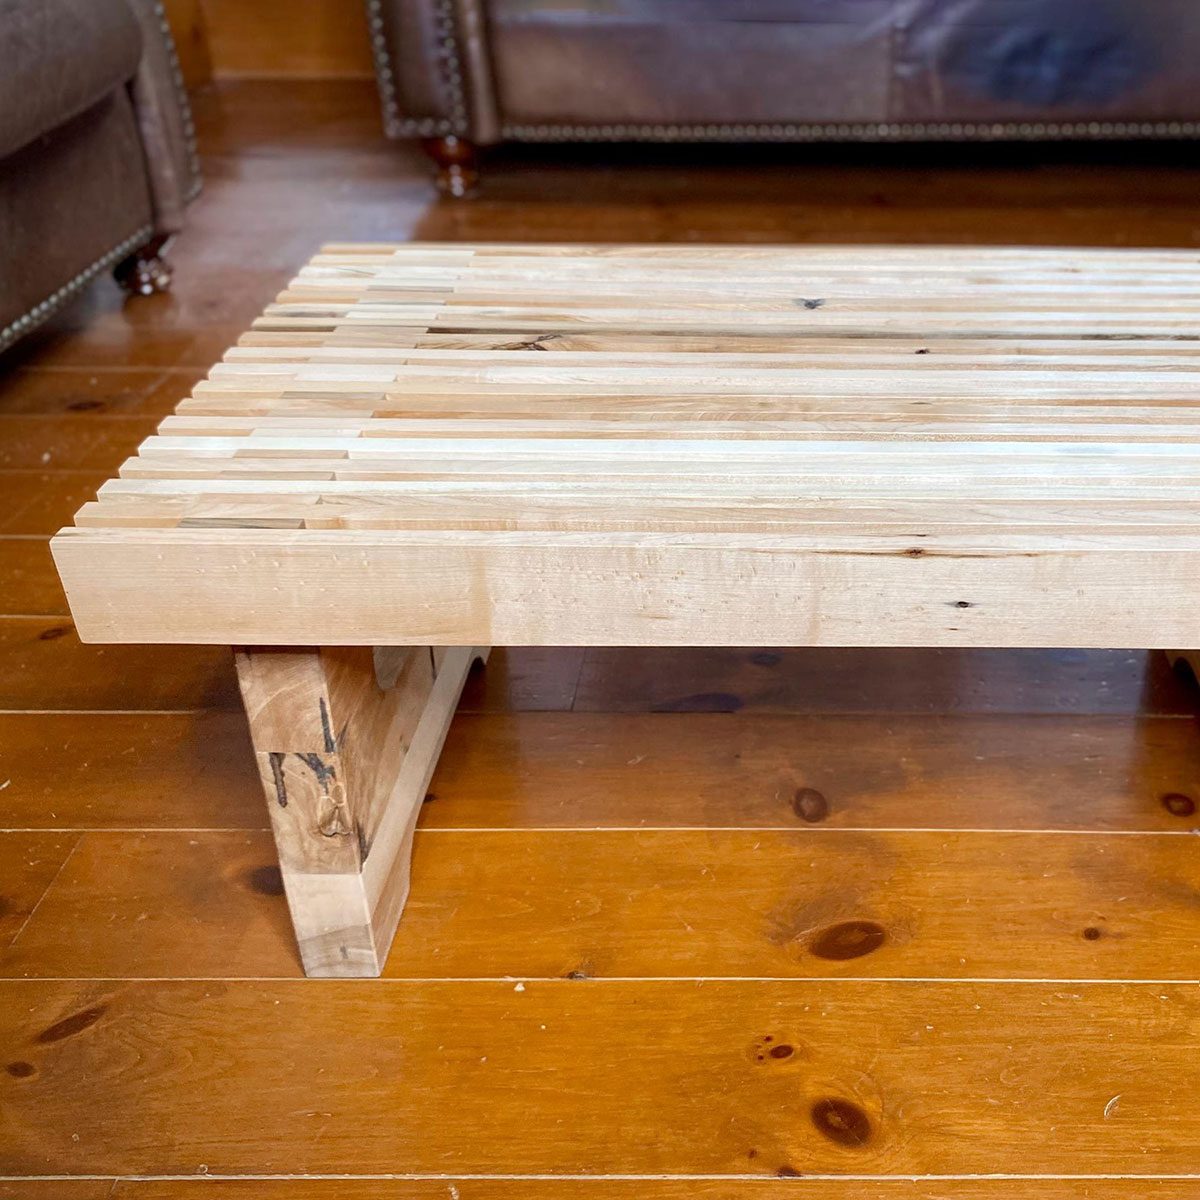 You Won't Believe What They Built With Just Some Old Pallets